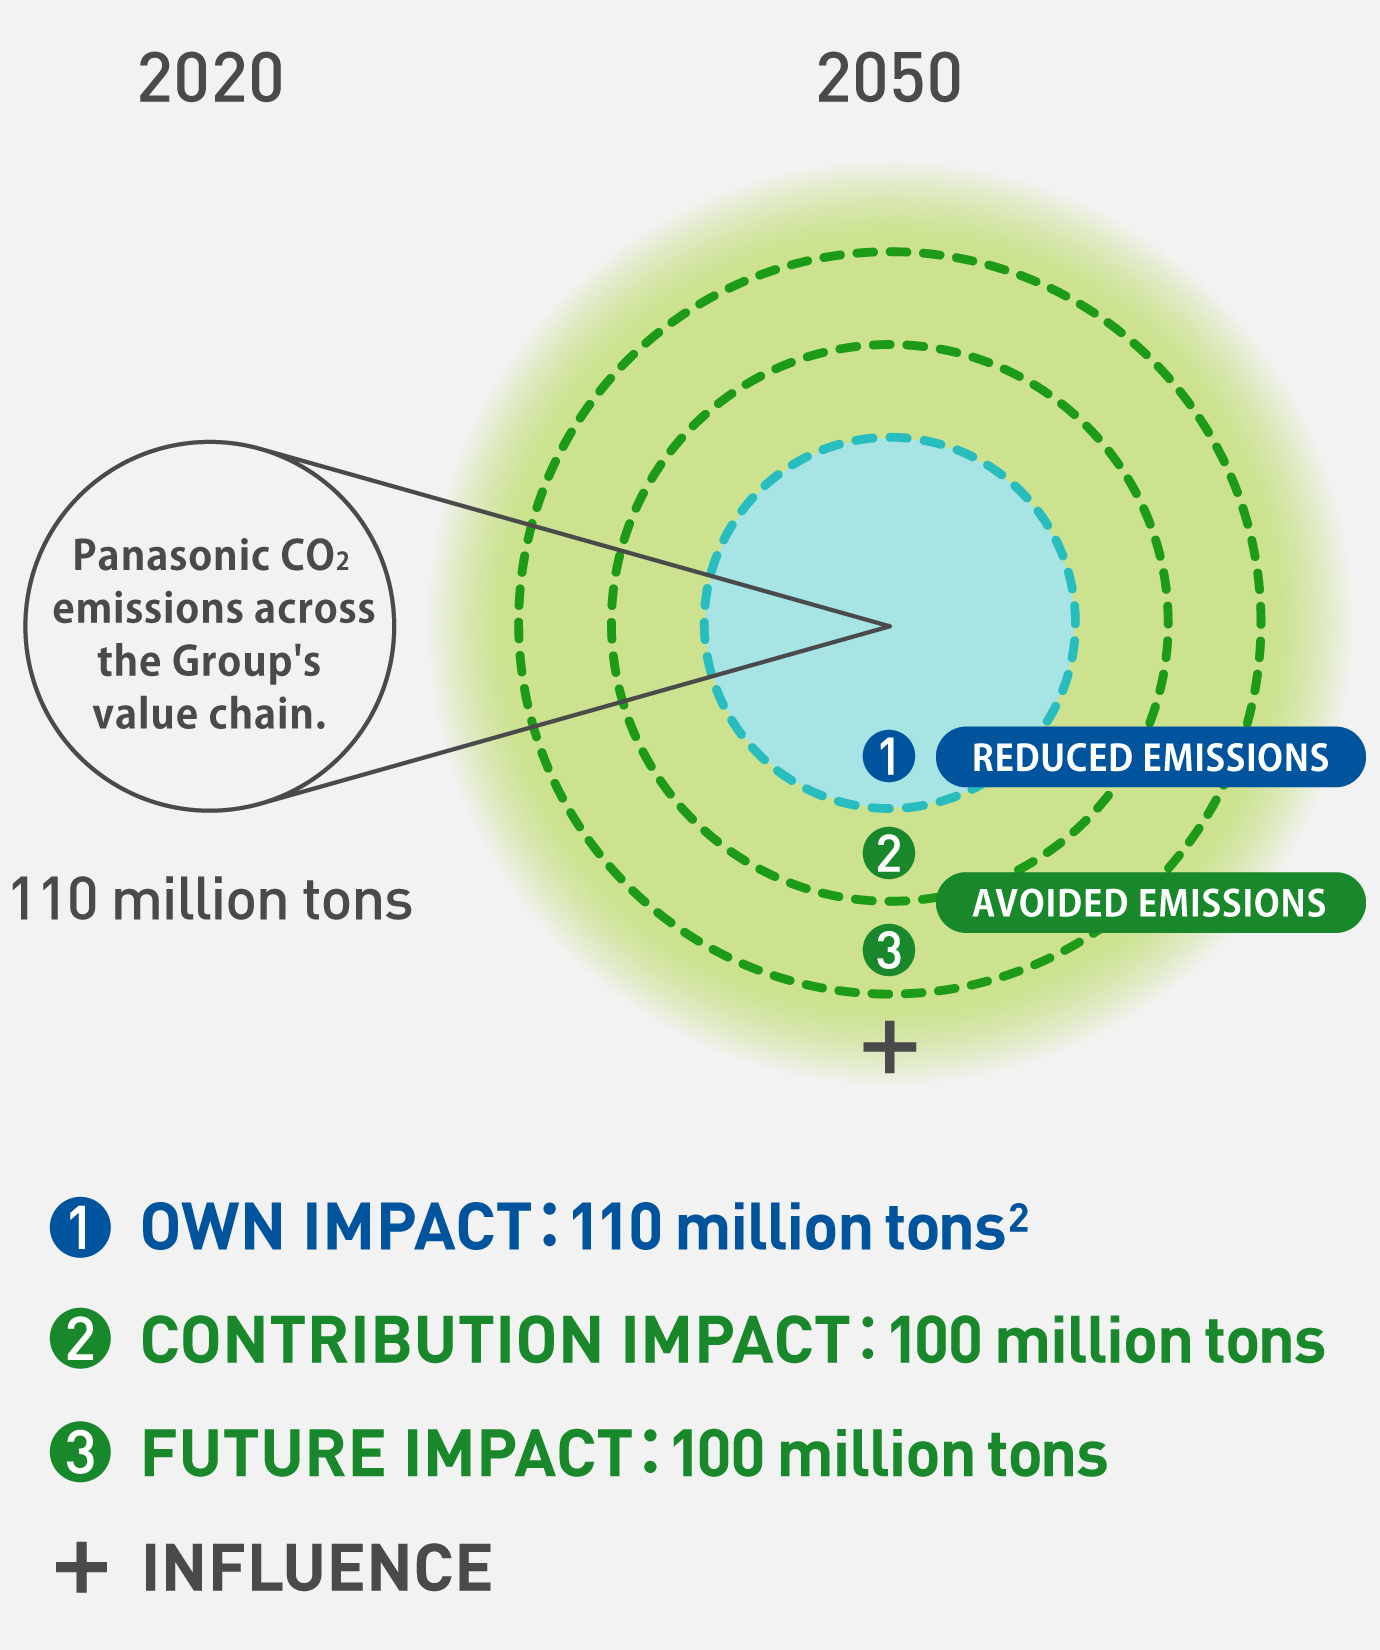 Conceptual diagram illustrating the expansion towards carbon neutrality from fiscal year 2021 to 2051. There is a small circle on the left and a large concentric circle with three layers on the right. The circle on the left represents the CO2 emissions of 110 million tons within our own value chain in fiscal year 2021, while the concentric circle on the right represents the impact of over 300 million tons of CO2 reduction by Panasonic GREEN IMPACT in fiscal year 2051. The concentric circle on the right is divided into OWN IMPACT, with the central circle representing it, CONTRIBUTION IMPACT with two layers, and FUTURE IMPACT with three layers. Additionally, there is a +INFLUENCE spreading outside the three concentric circles. OWN IMPACT aims for a reduction of 110 million tons of emissions, while CONTRIBUTION IMPACT and FUTURE IMPACT each aim for avoided emissions of 100 million tons.